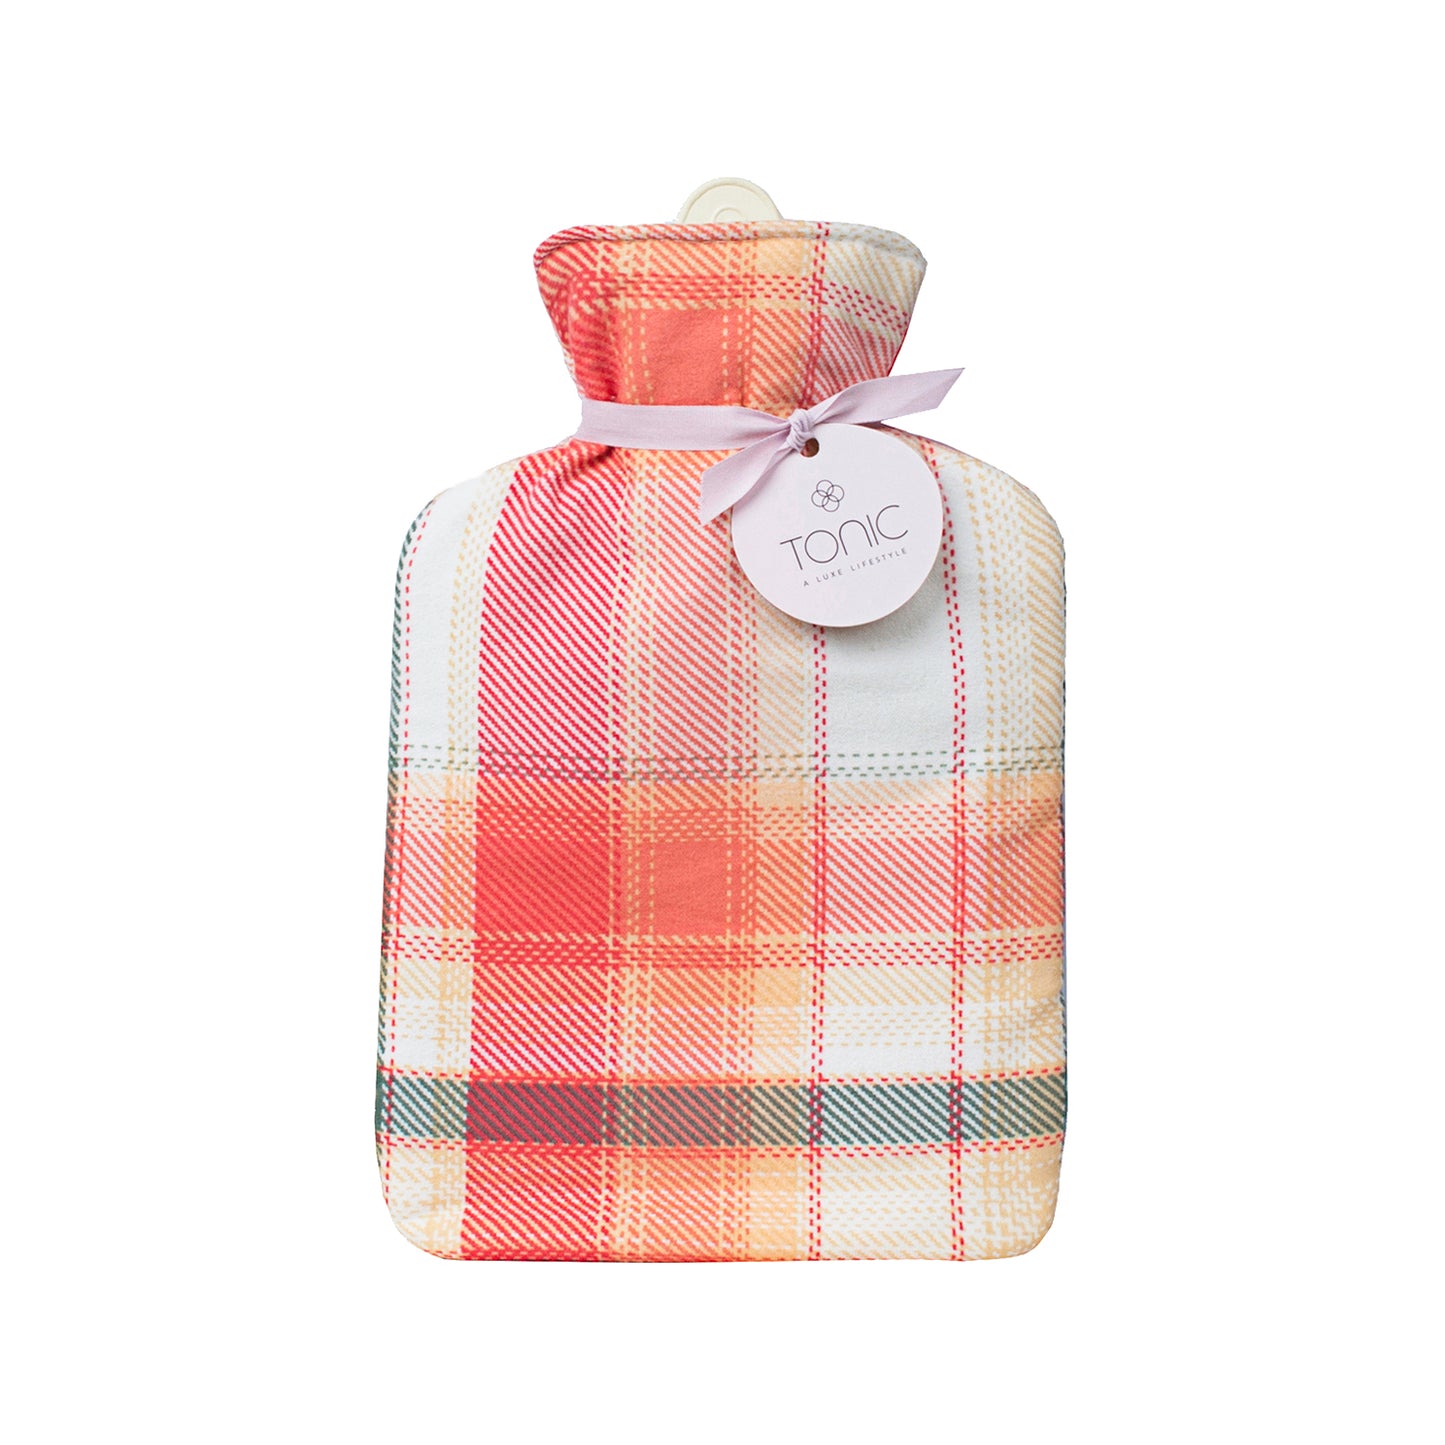 Flannel Check Small Hot Water Bottle